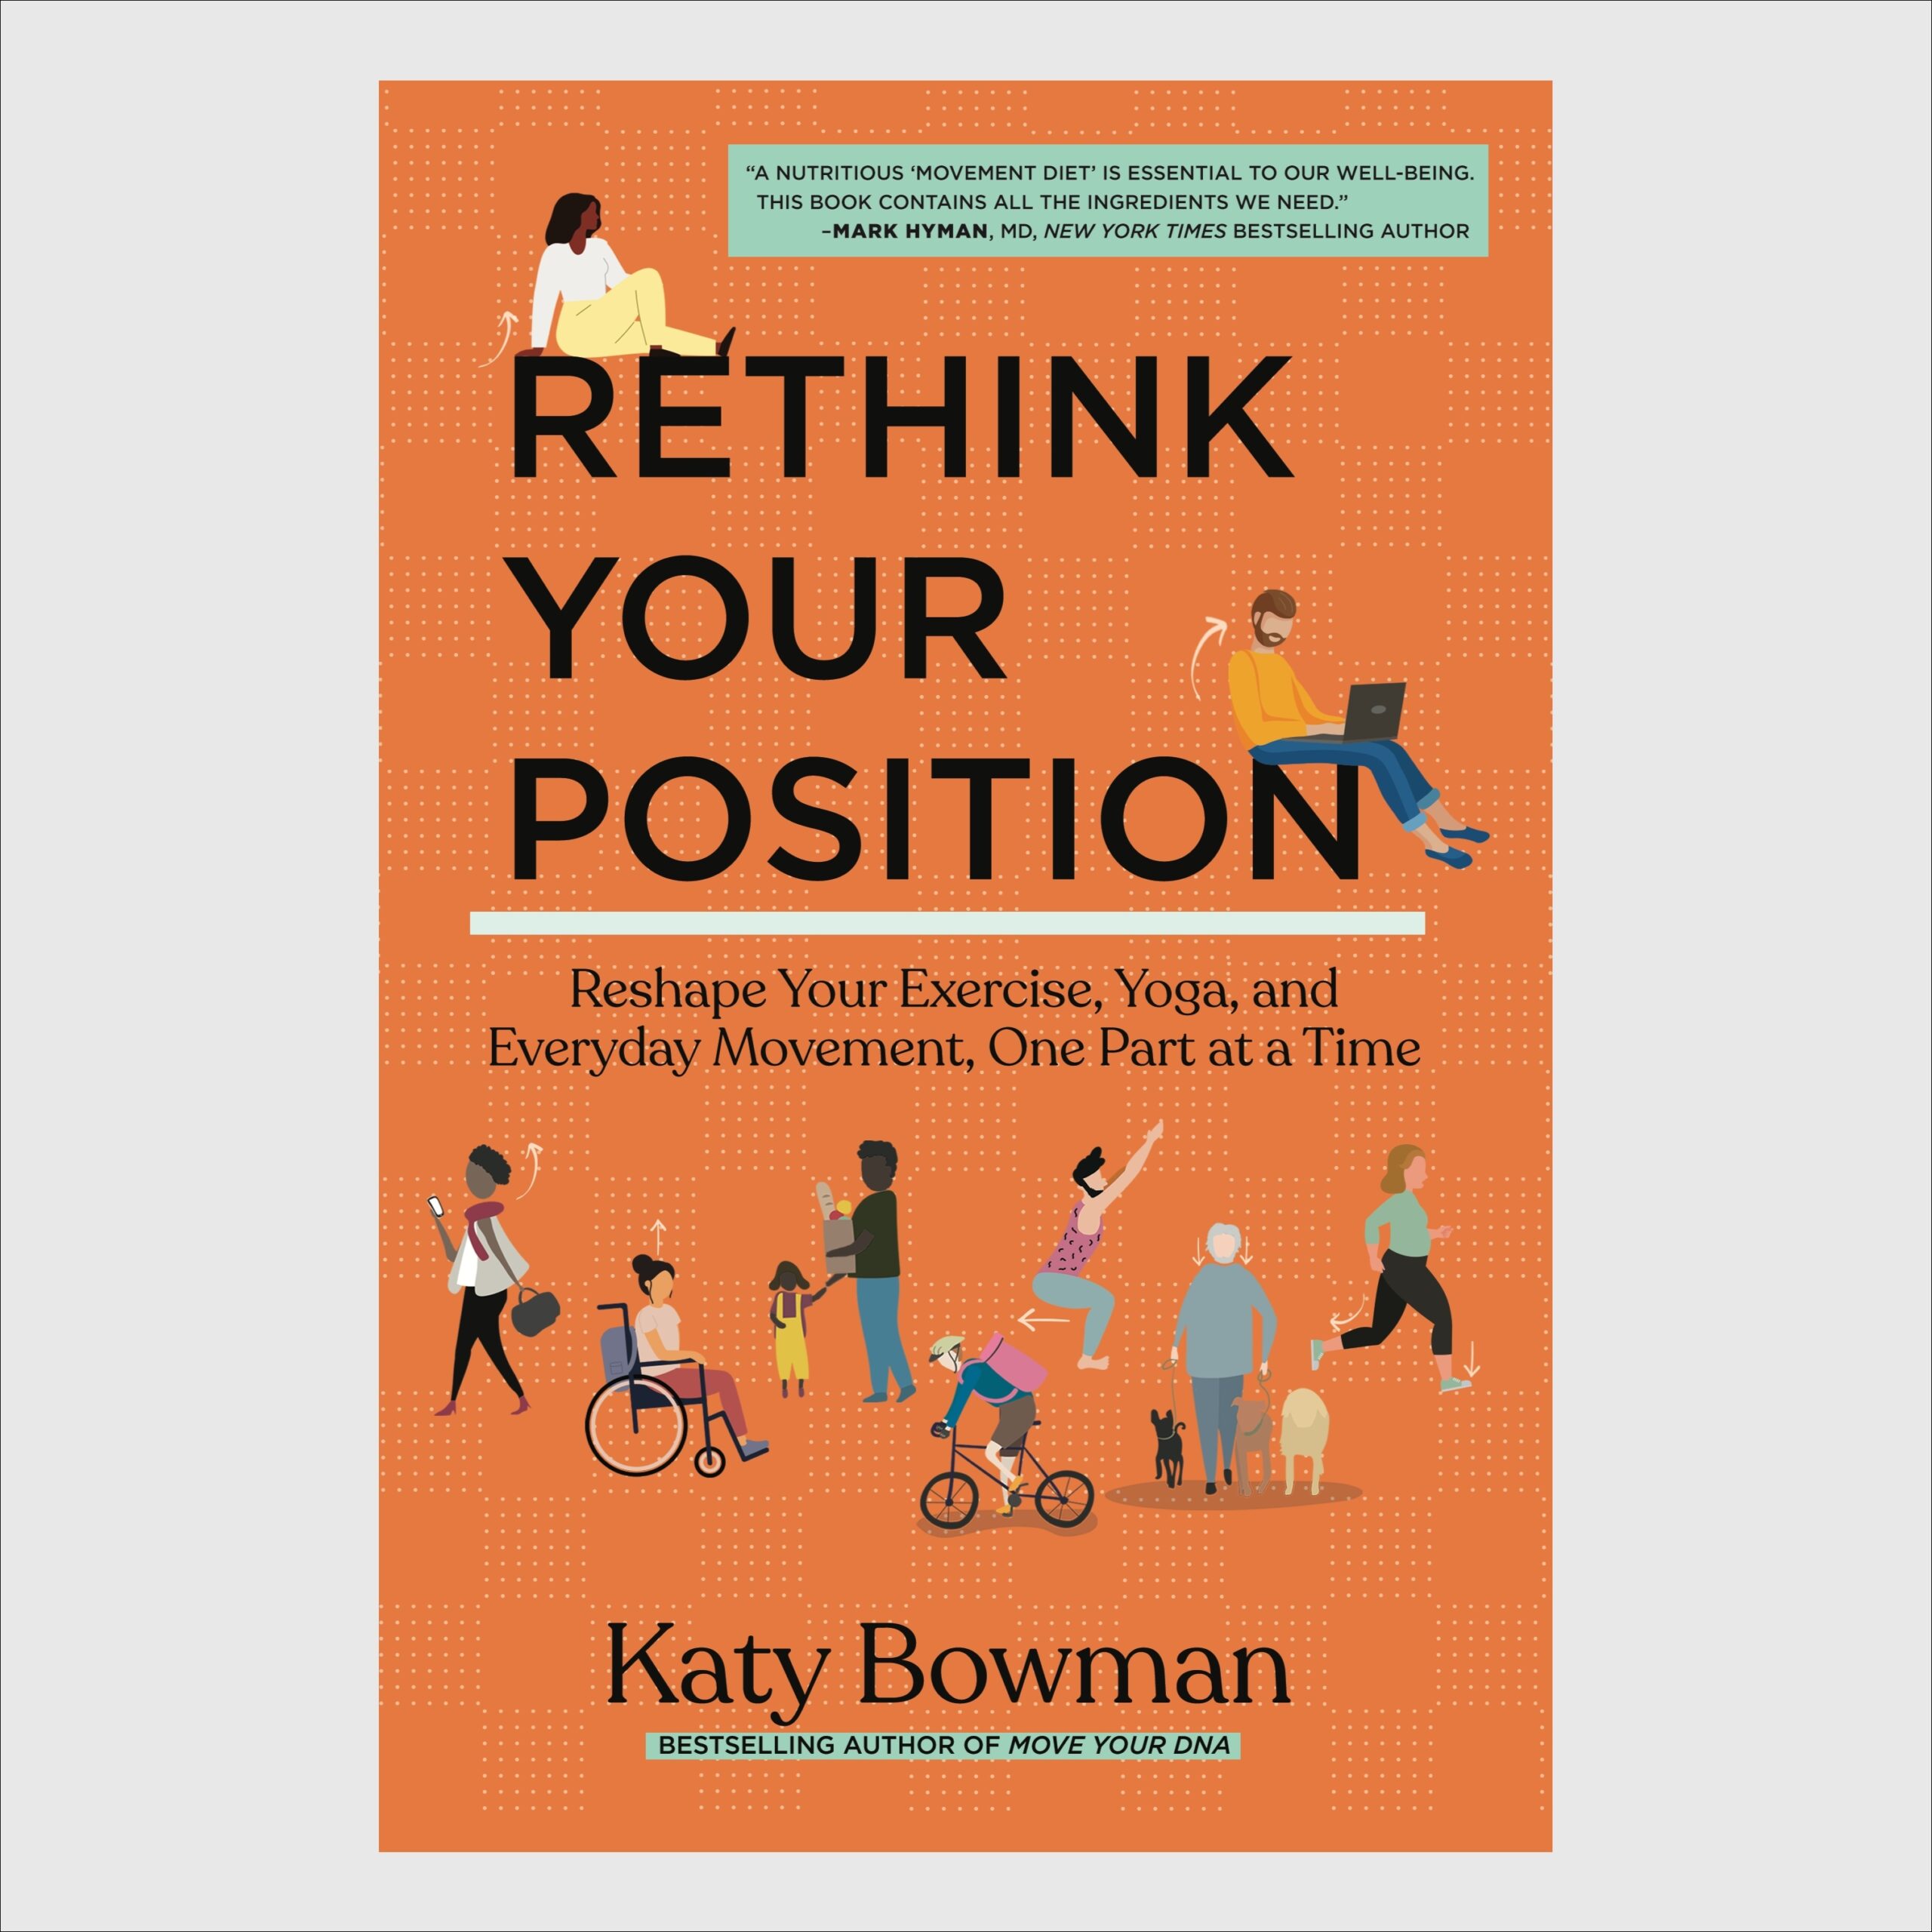 Movement,　Rethink　and　Your　Reshape　Everyday　at　Position:　Your　Exercise,　Time—PAPERBACK　Yoga,　One　Part　a